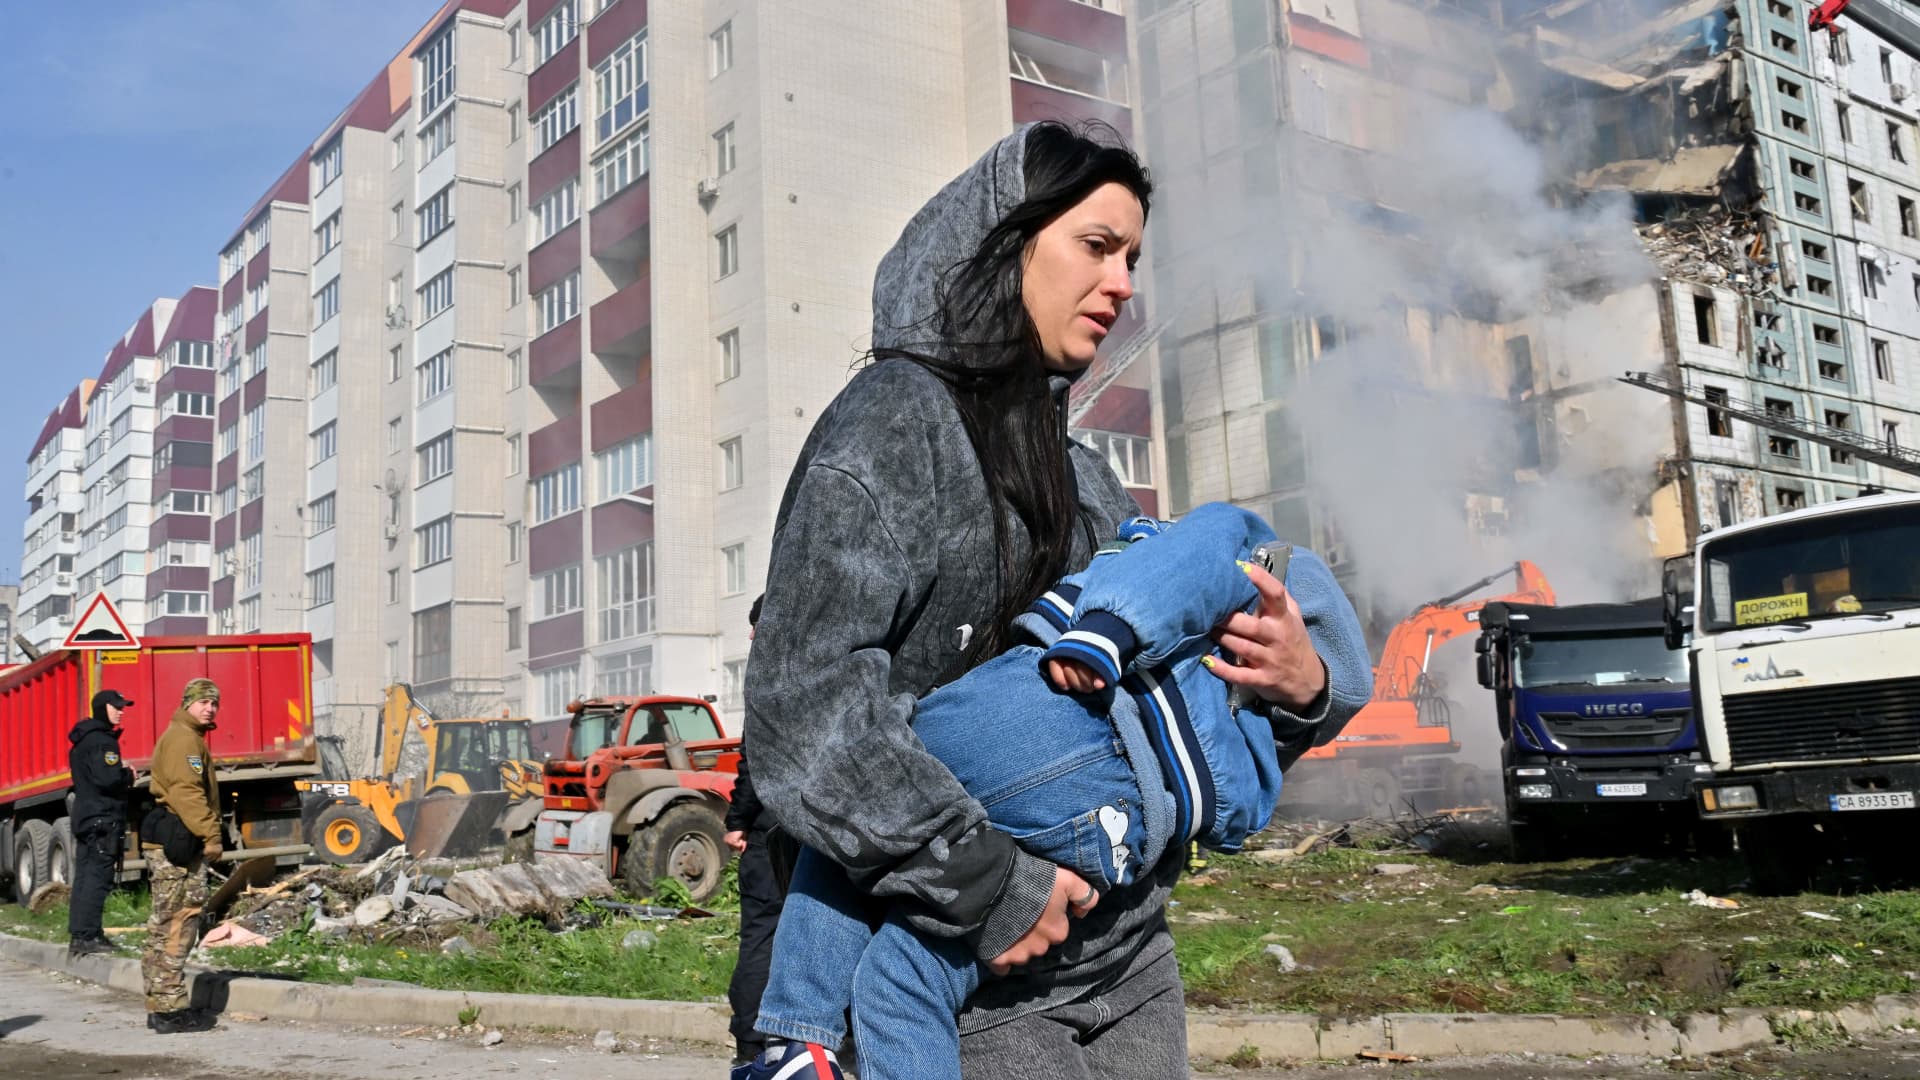 A woman walks past damaged residential buildings as she carries a child in Uman, around 215km southern Kyiv, on April 28, 2023, after Russian missile strikes targeted several Ukrainian cities overnight.